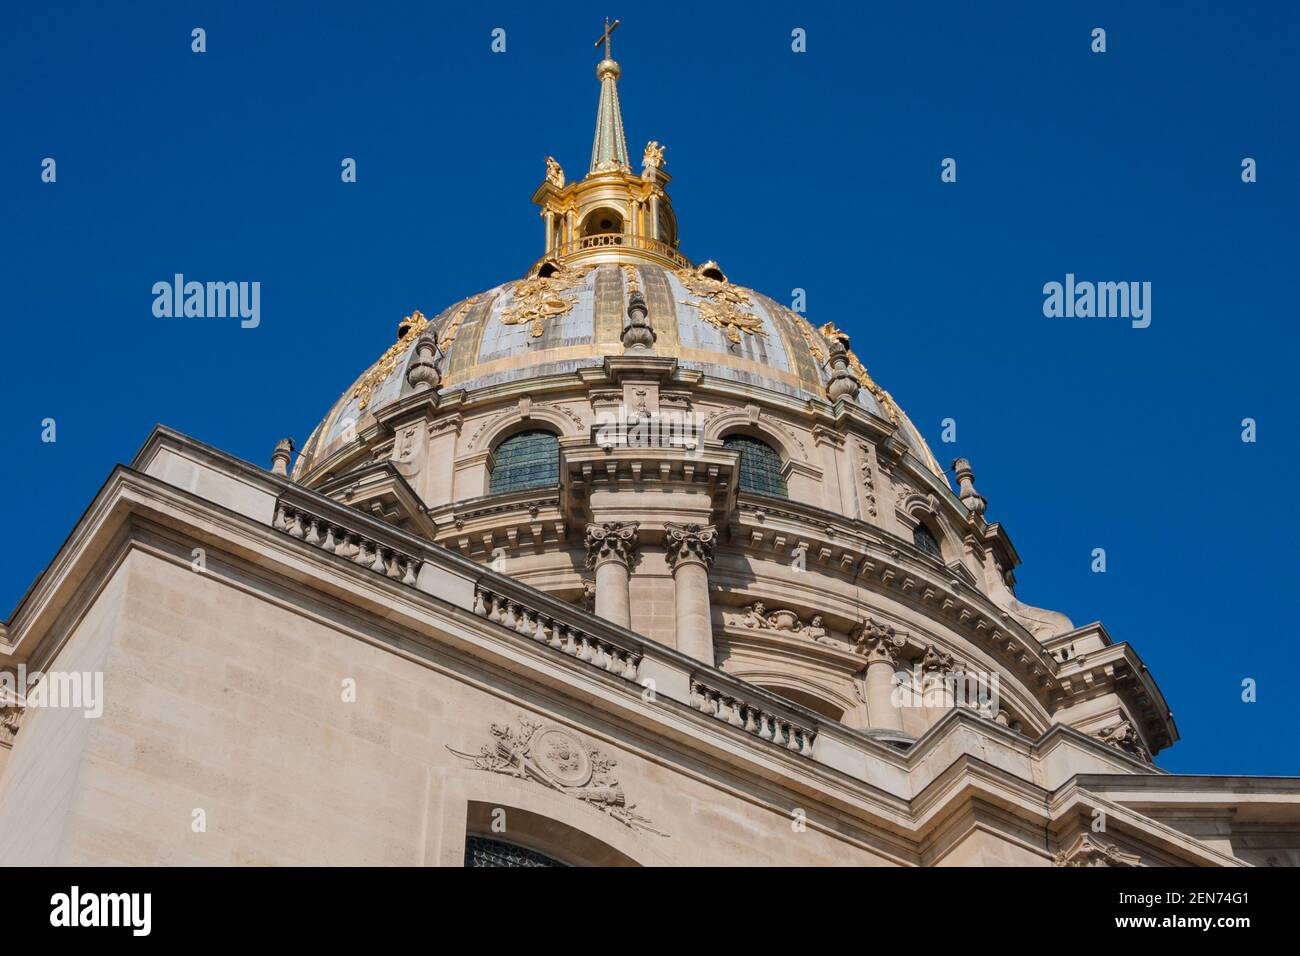 Top detail of golden Dôme des Invalides (Invalids Dome) former church with Napoleon Bonaparte tomb in Paris, France under clear blue sky Stock Photo